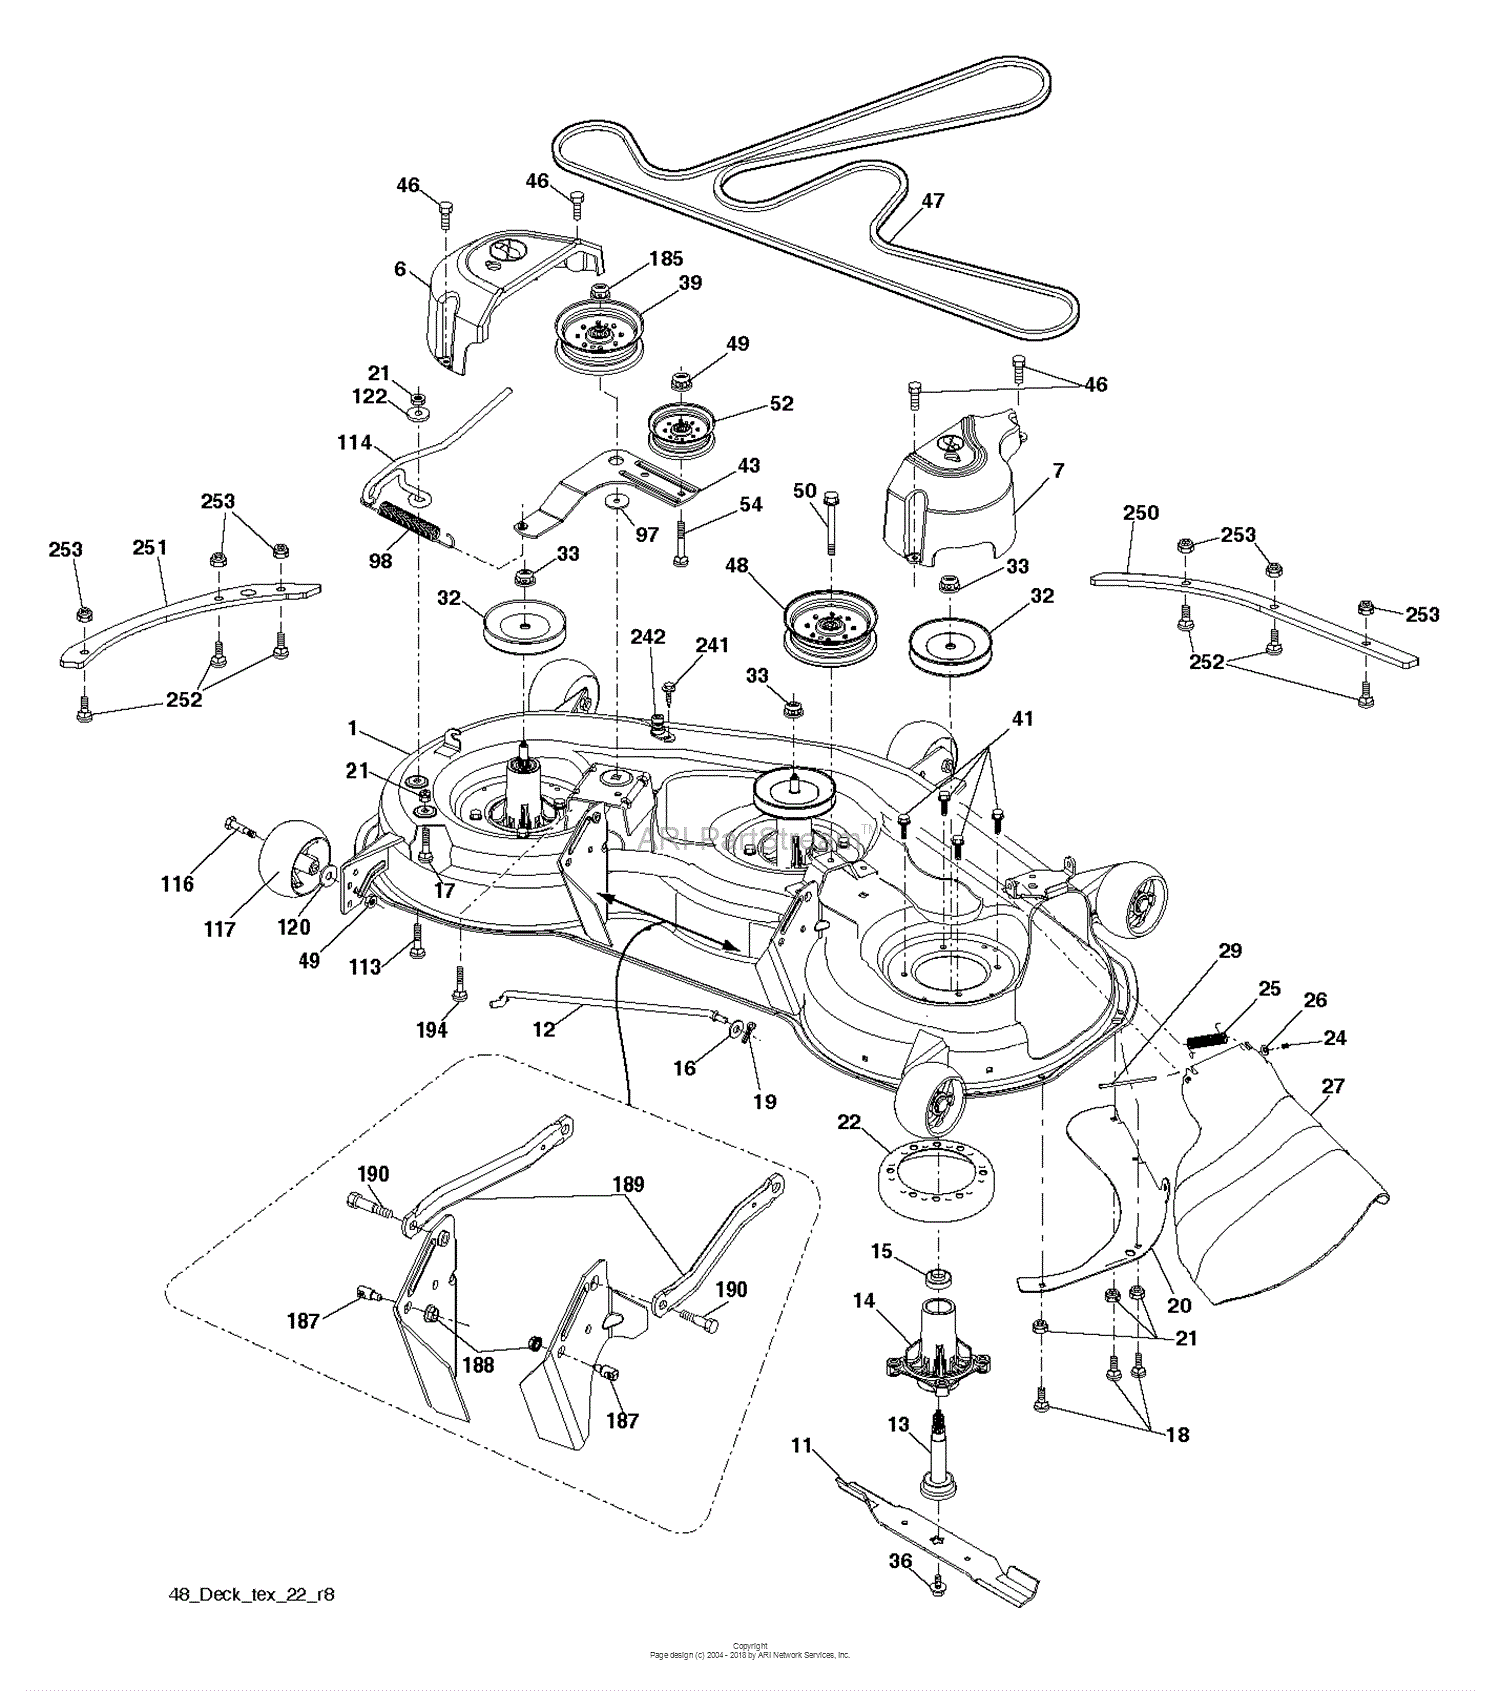 Parts Diagram For Mower Deck Cutting